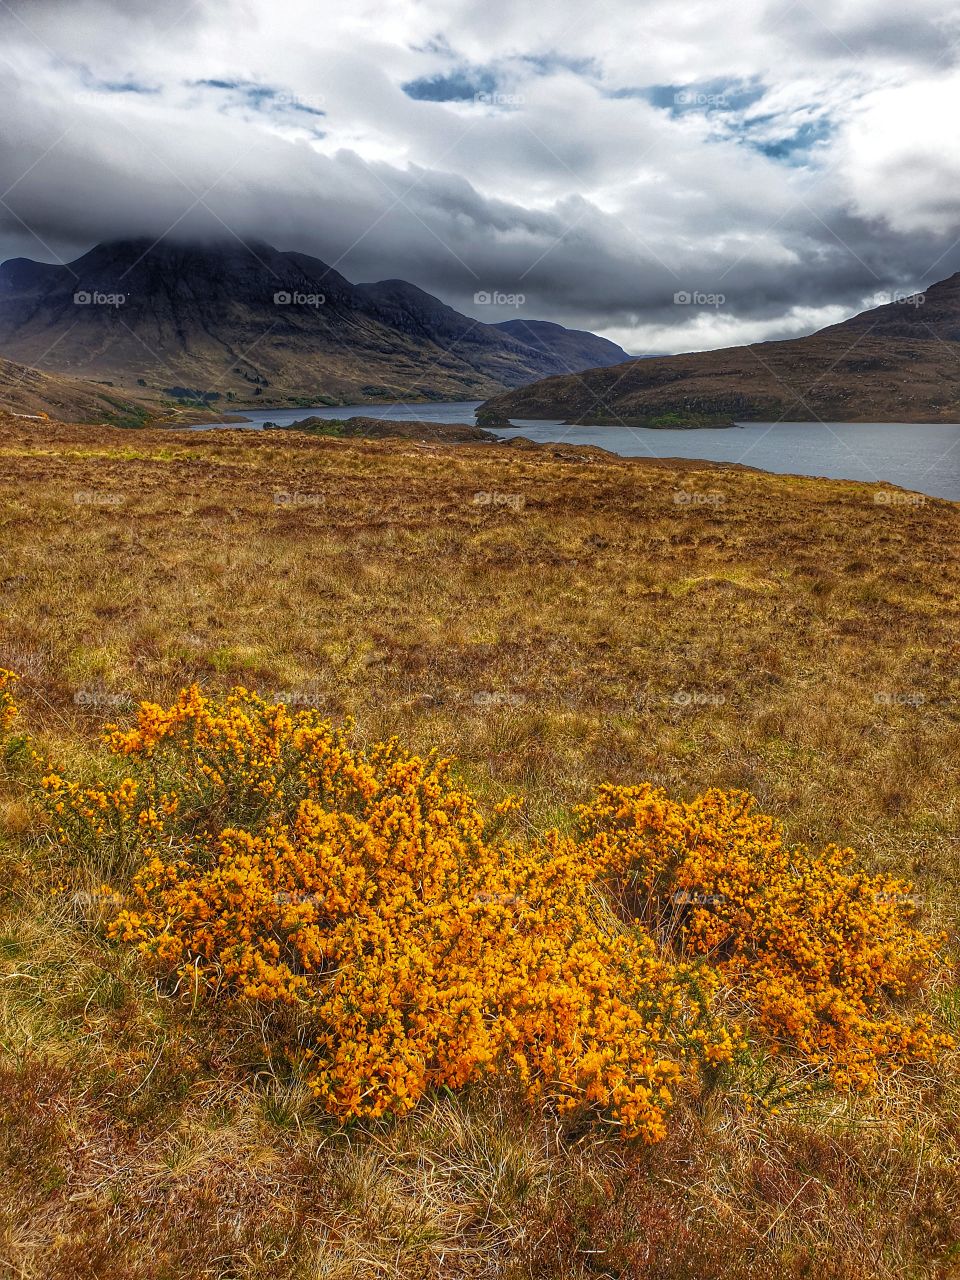 Cloudy skies over mountains by Loch Lurgainn in Ullapool, Scotland. Beautiful yellow and orange gorse in the foreground of this wild terrain.